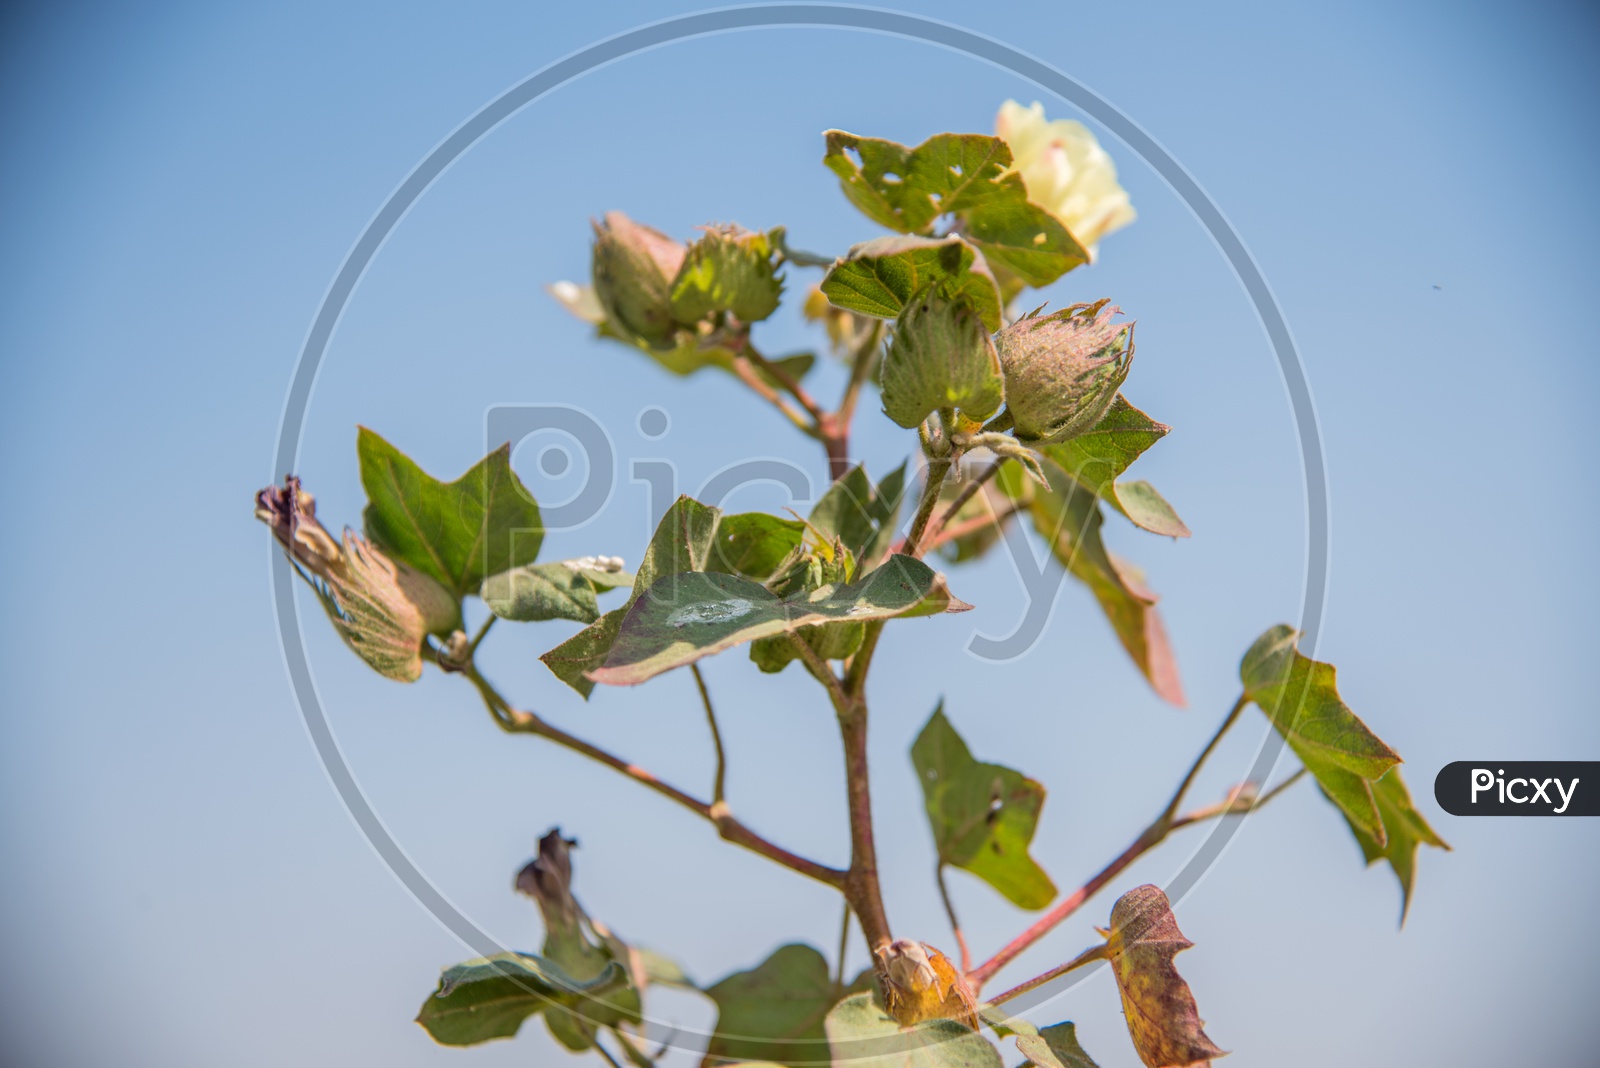 Cotton Balls And Flowers  Growing On The Plants In an Agricultural Field  or Cotton Farm